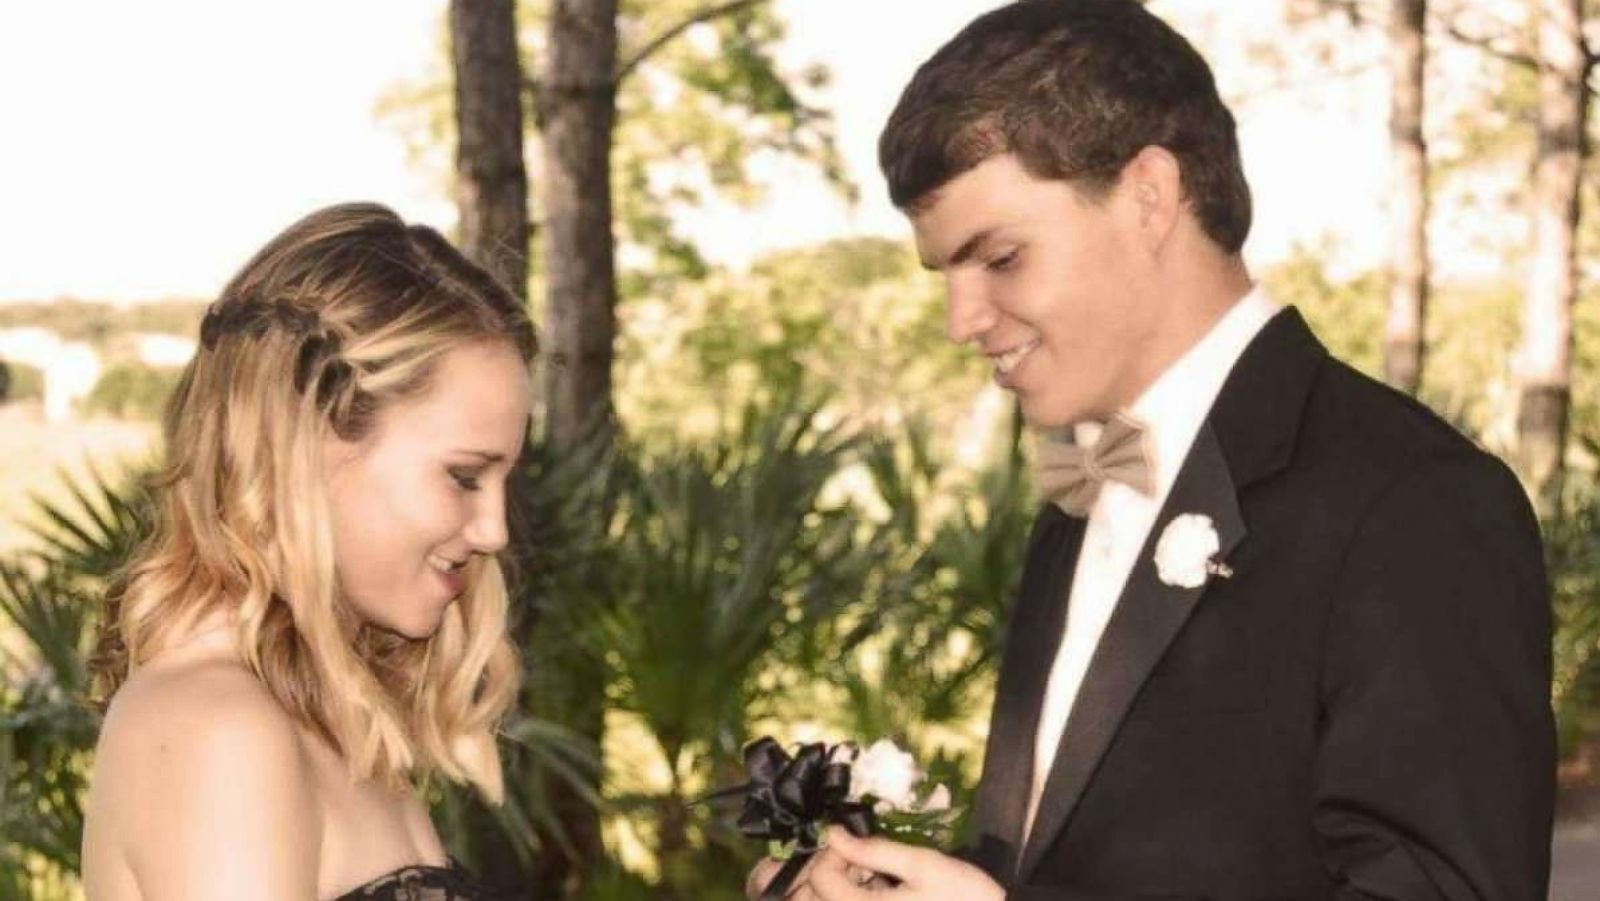 Teen with terminal cancer to marry high school sweetheart - ABC News